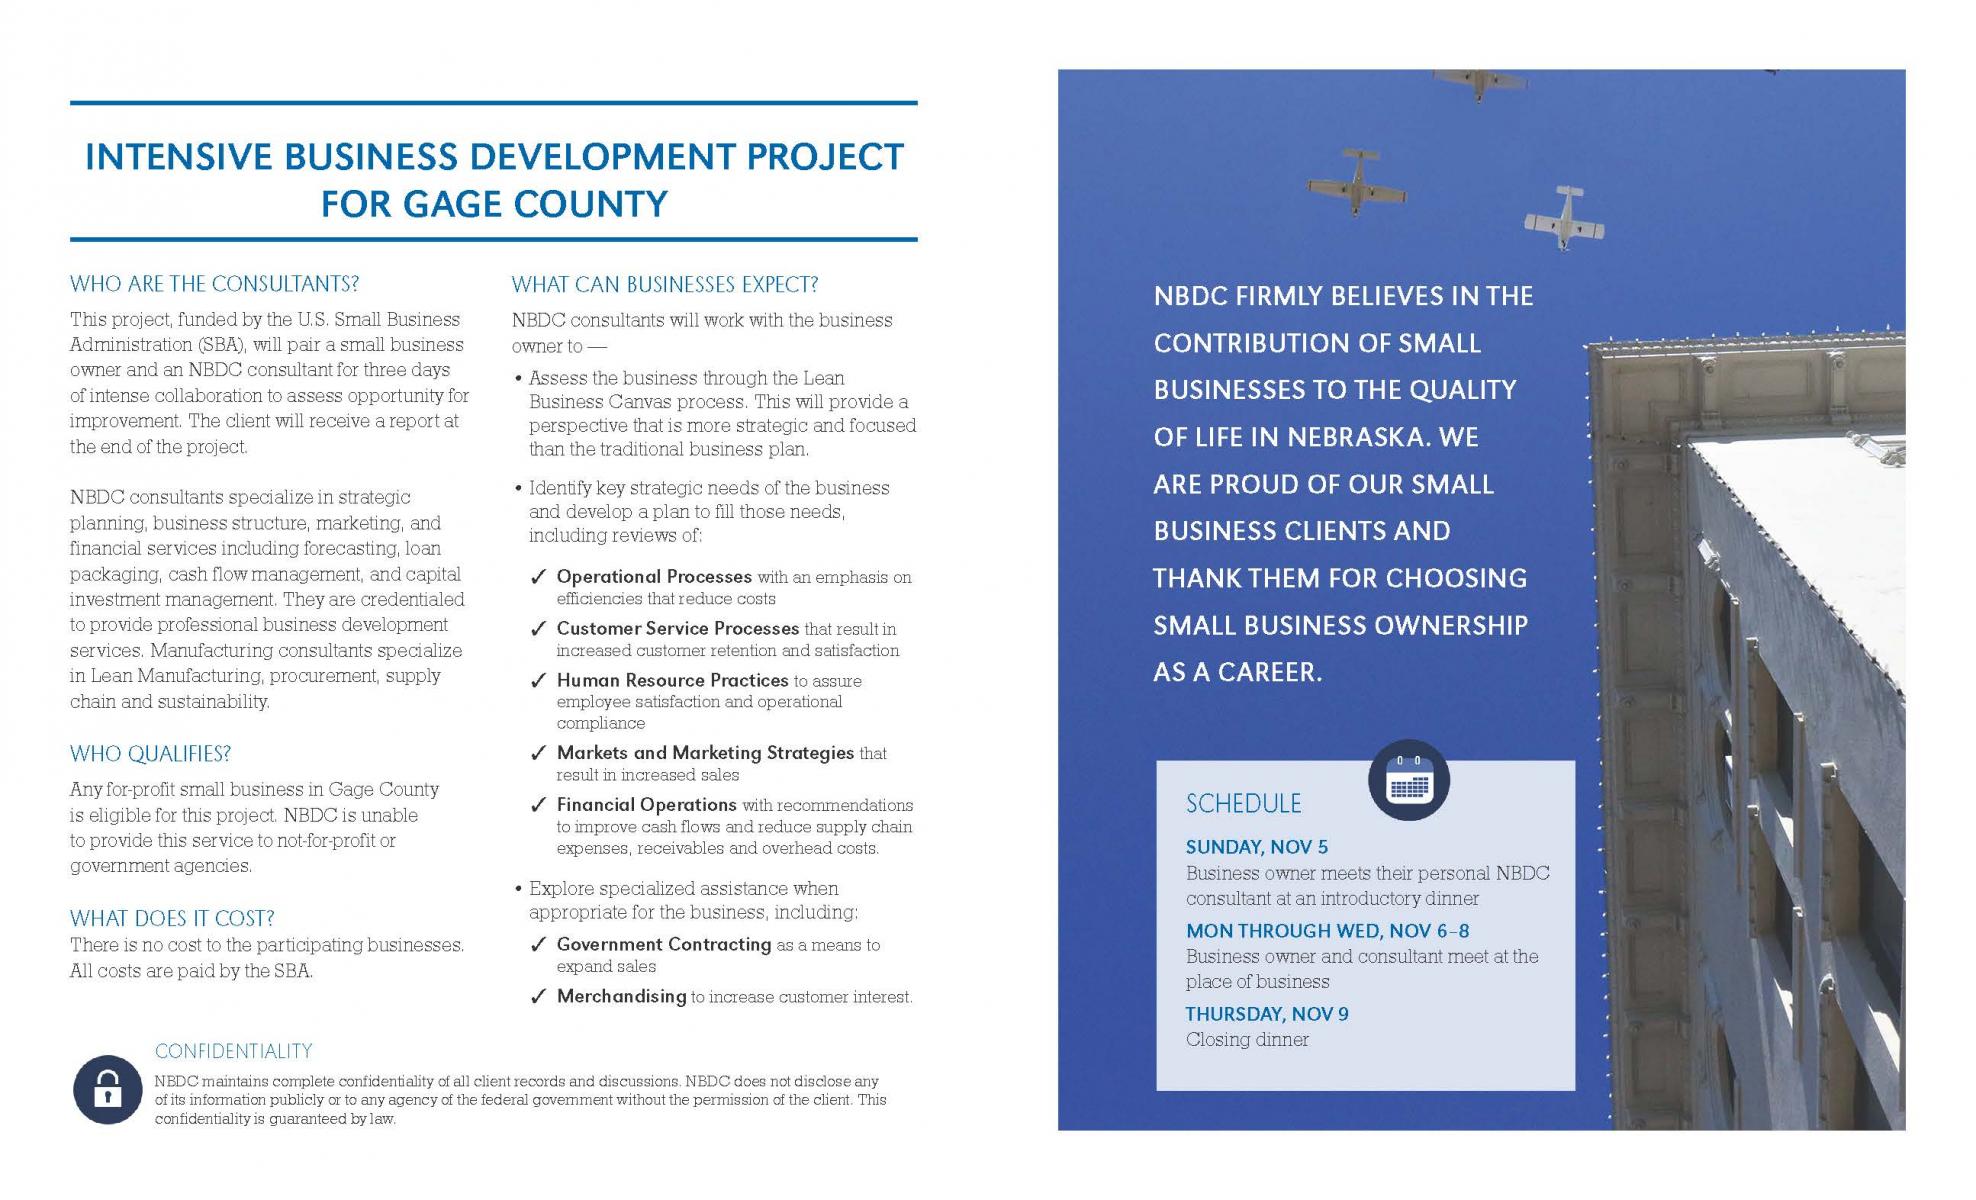 NGage Teaming Up with NBDC for Business Development Project Main Photo